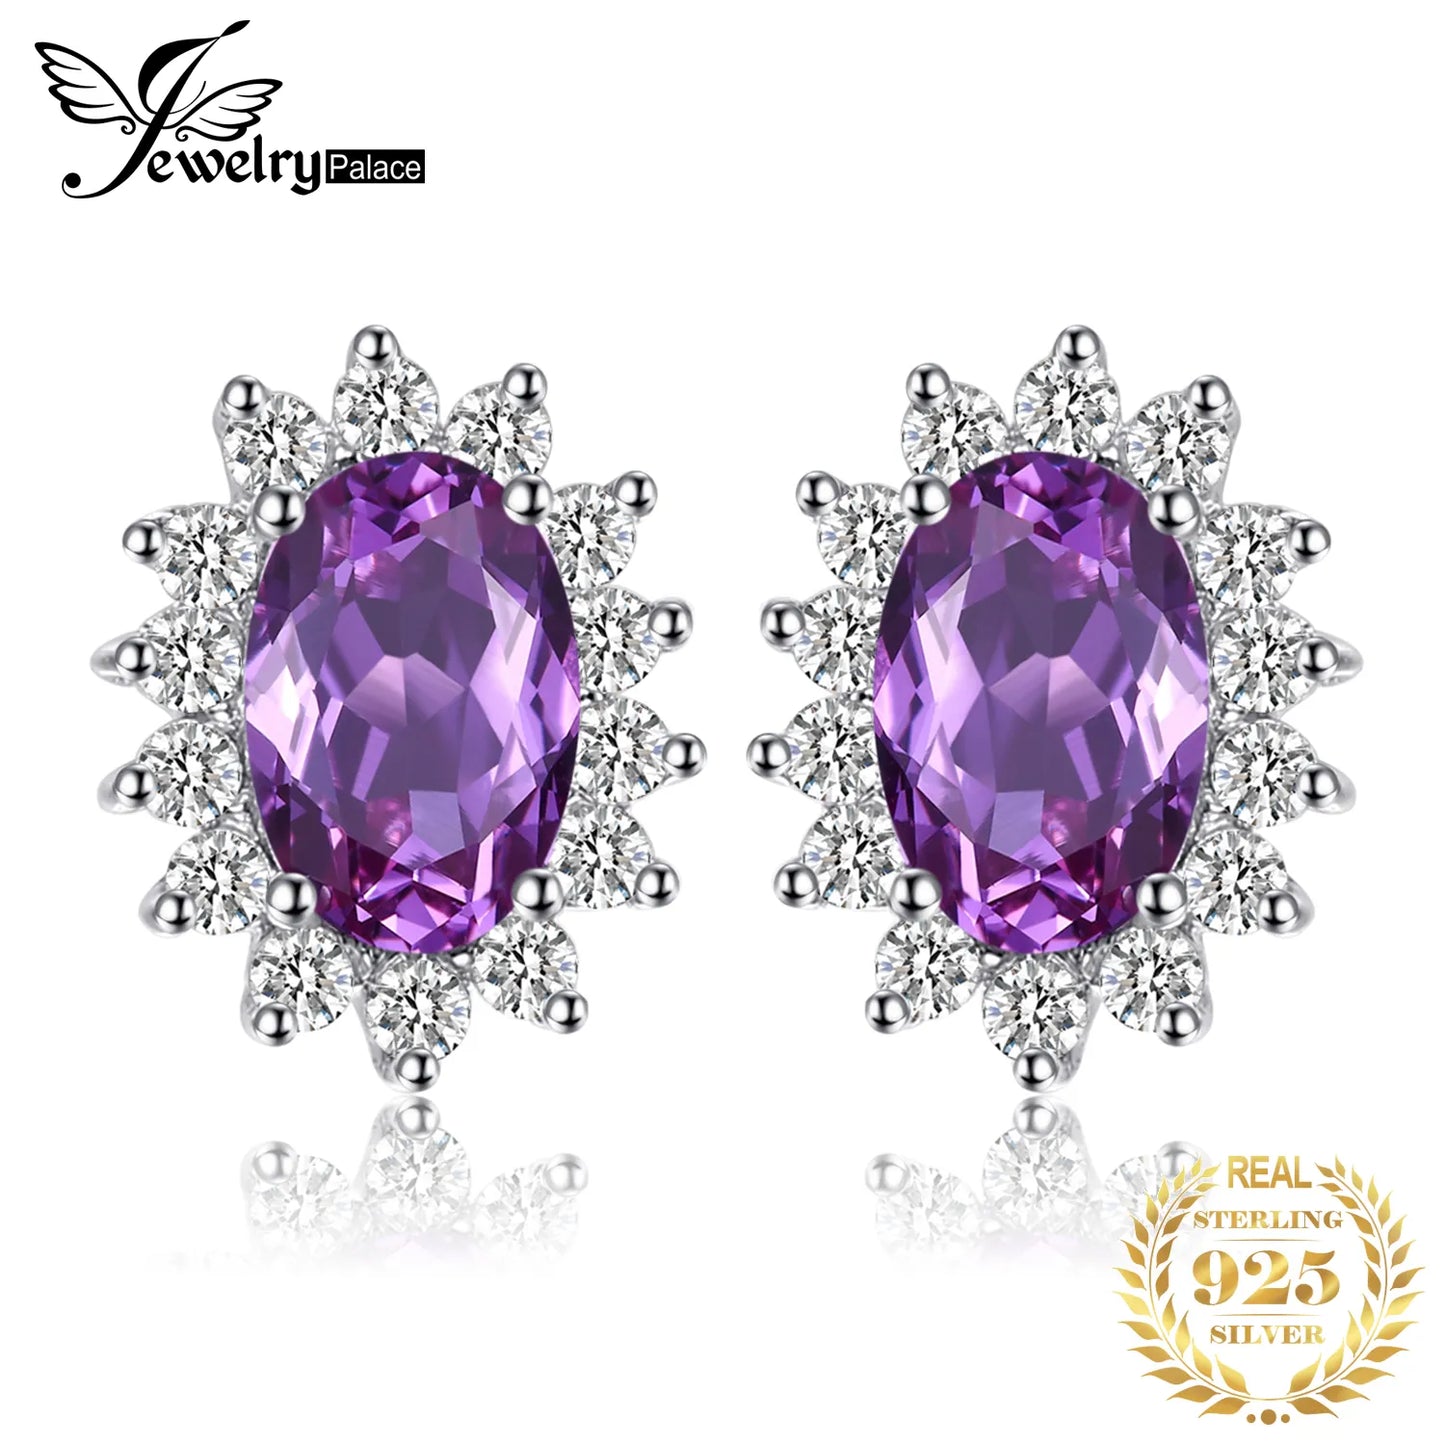 JewelryPalace 1.2ct Created Alexandrite 925 Sterling Silver Stud Earrings for Women Princess Diana Engagement Jewelry Default Title